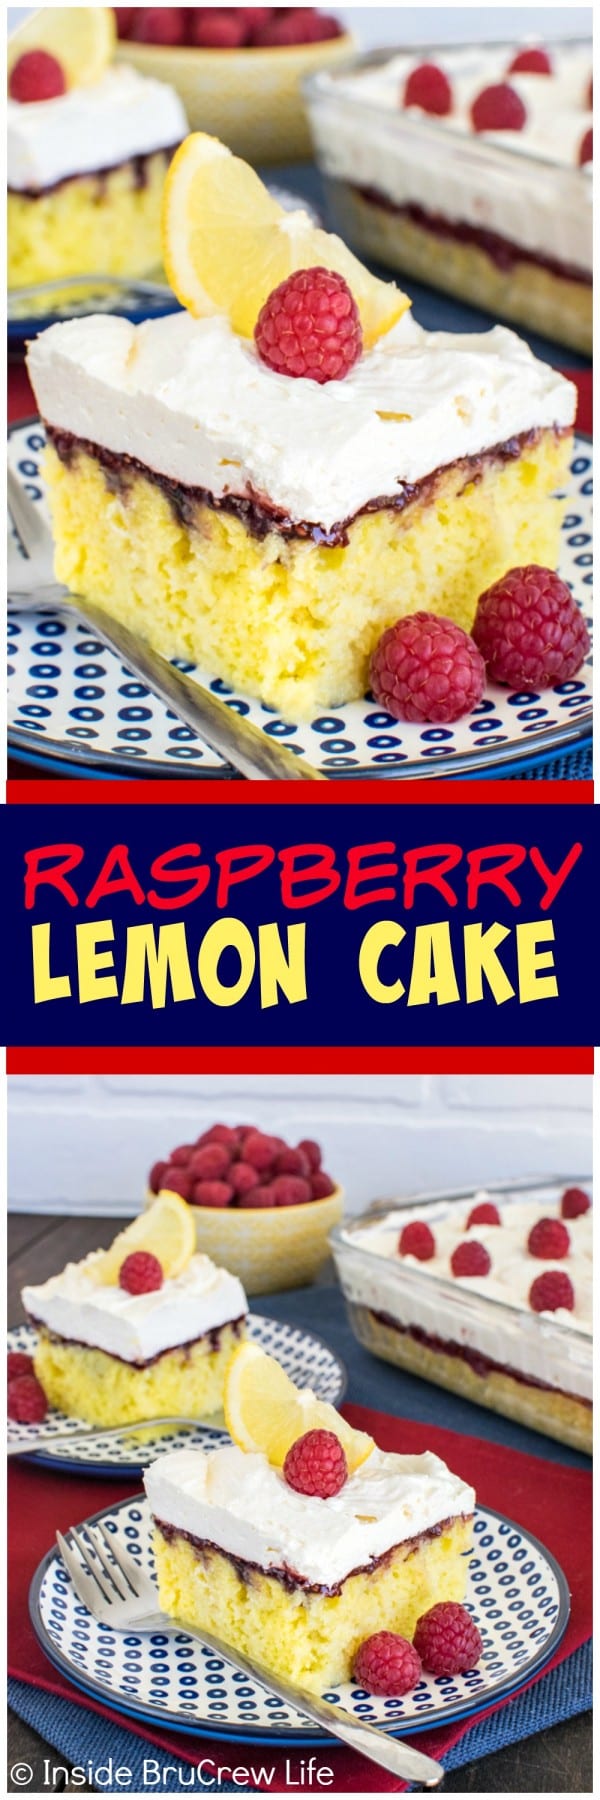 Raspberry Lemon Cake - lemon mousse and raspberry preserves add a fun twist to this easy cake. It is the perfect summer dessert recipe.